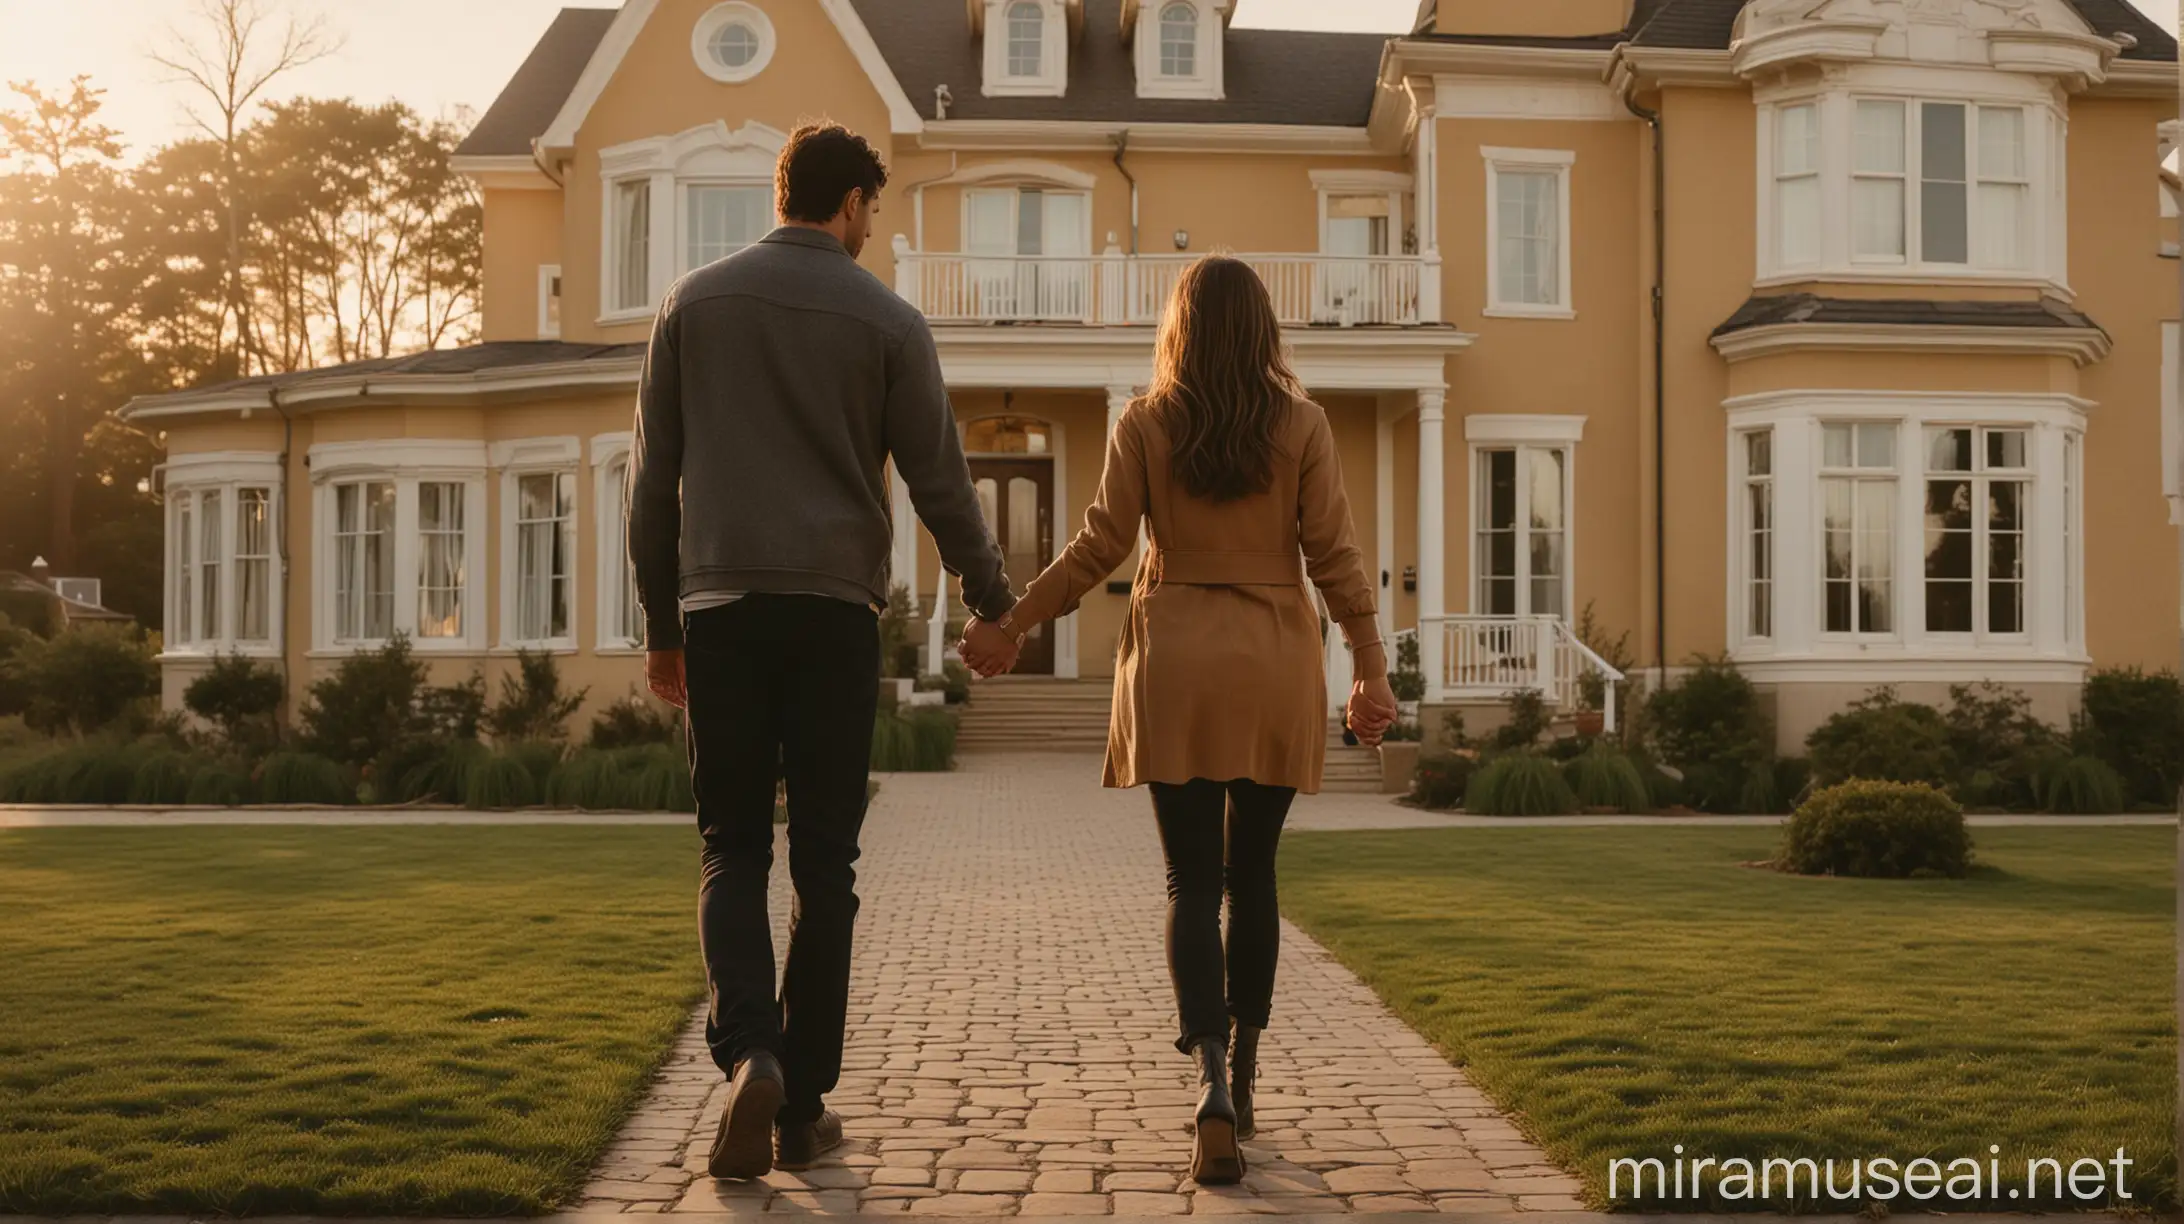  extreme long shot from behind of a couple holding hands in front of their dream house, golden hour, crisp details, Canon EOS 5D MARK IV, 35mm